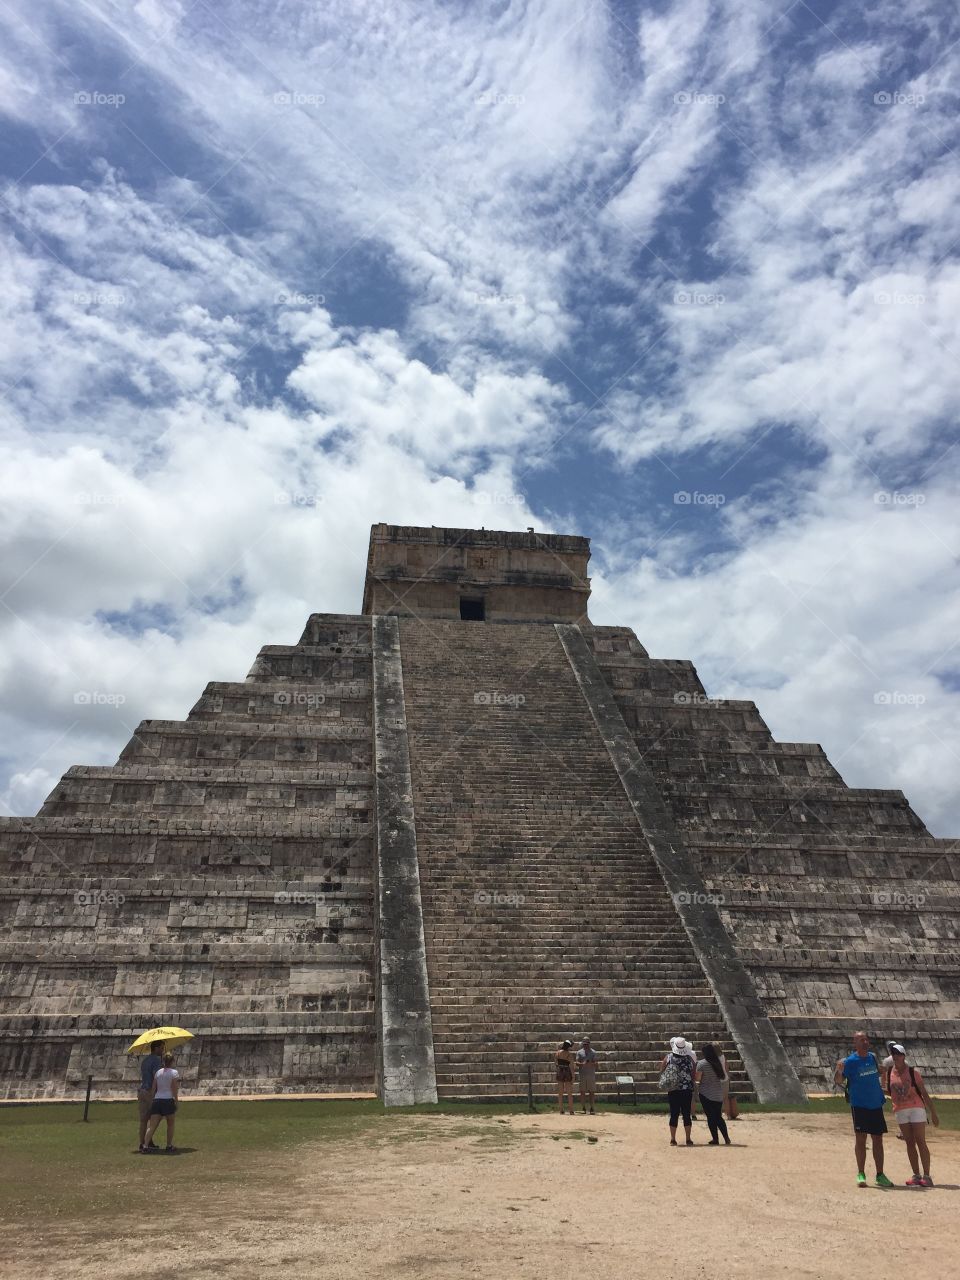 Pyramid, Architecture, Archaeology, Travel, Ancient